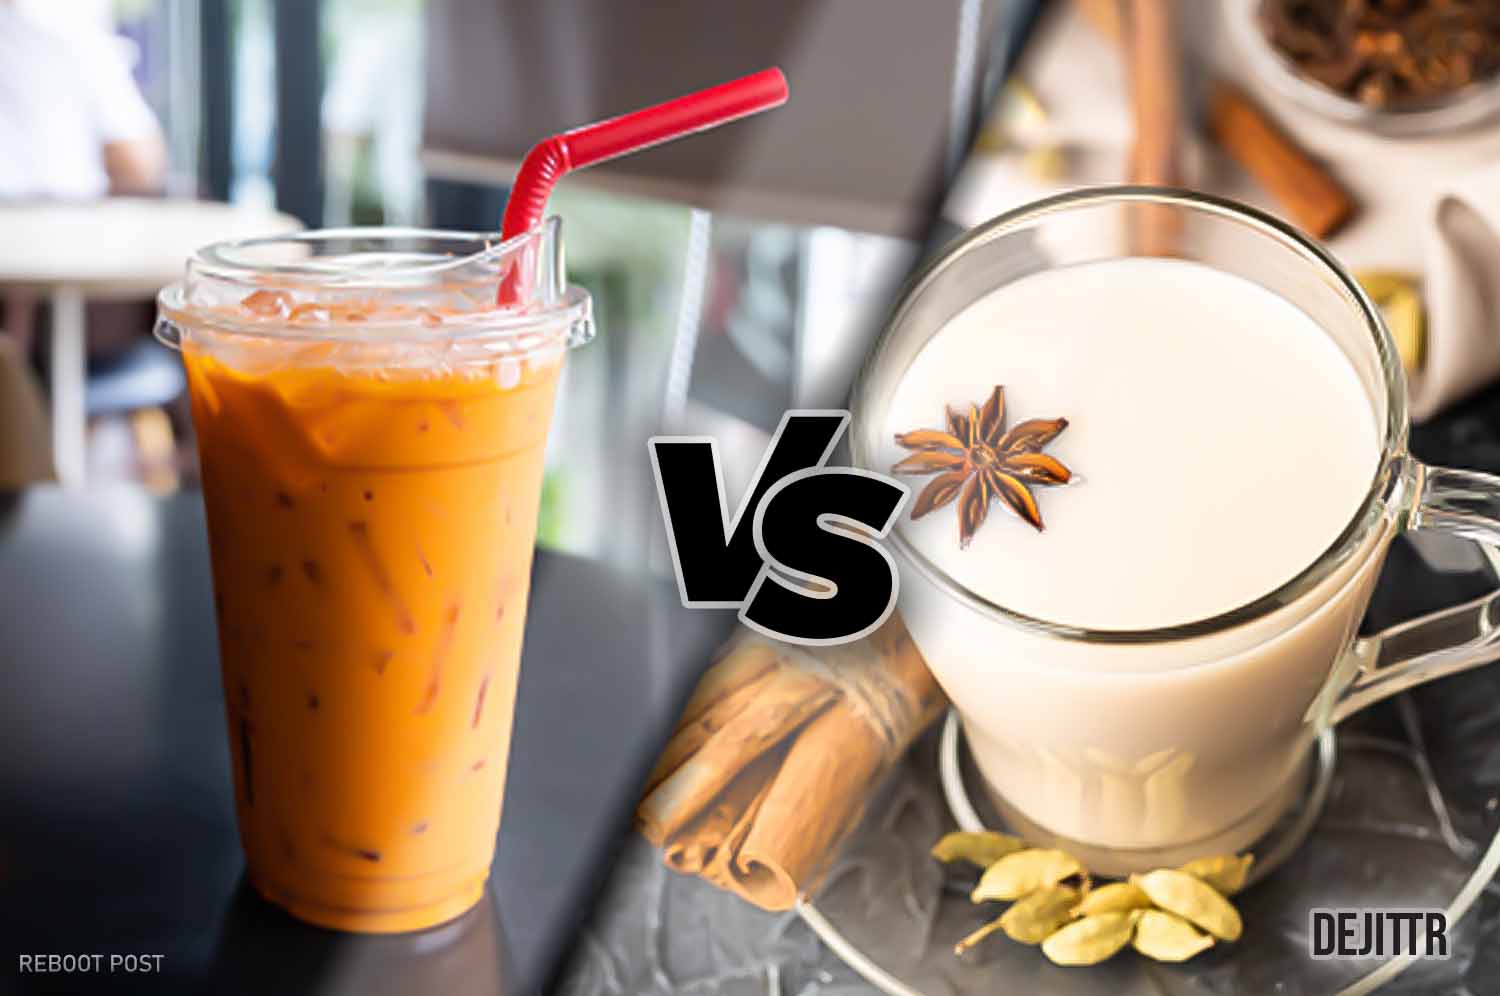 Plastic cup filled with thai tea with red straw in it beside a hot glass cup of Chai Tea with a VS logo between them